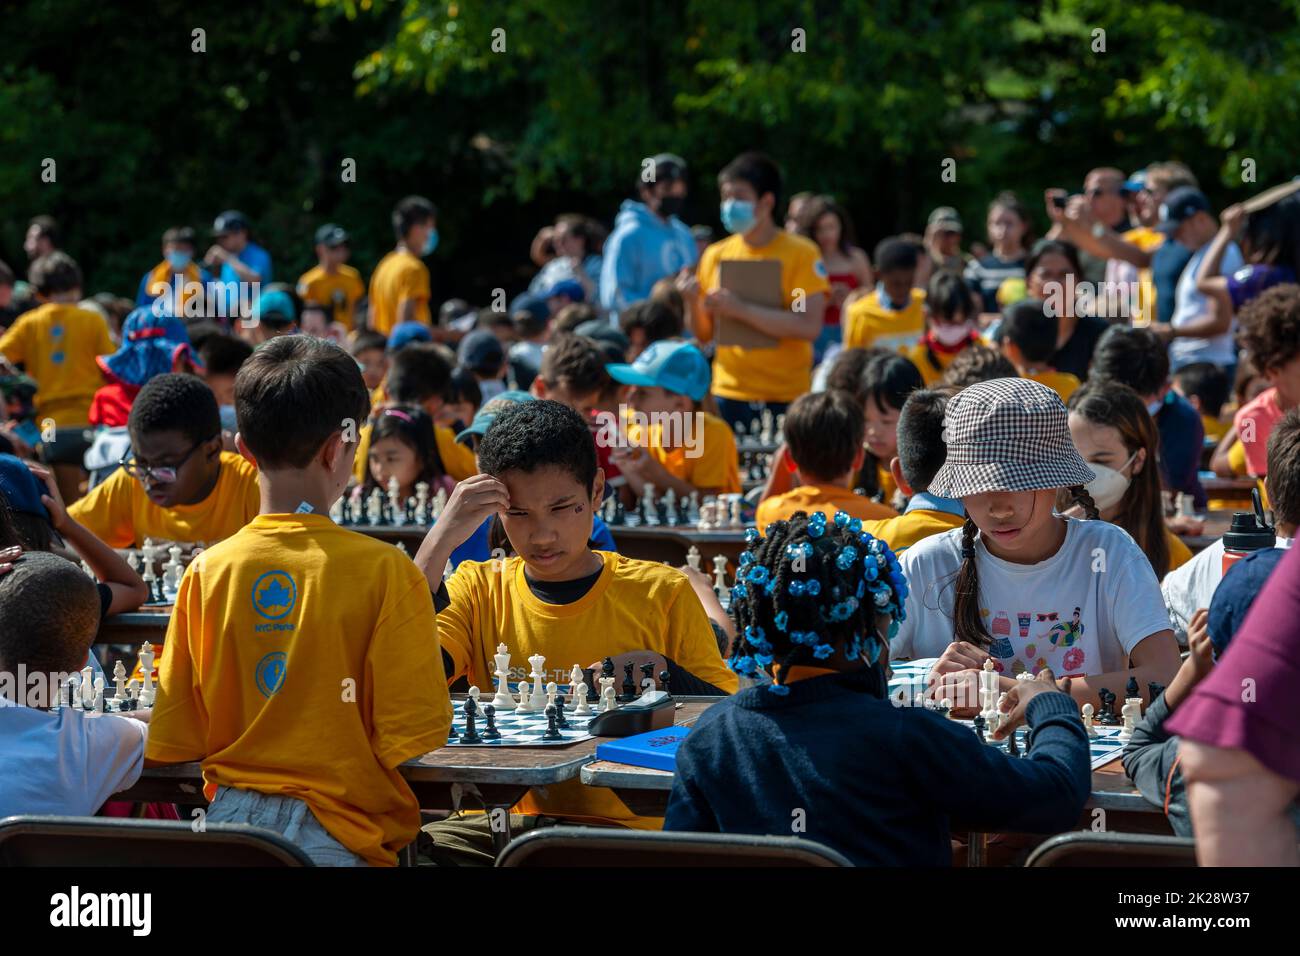 Chess players compete in the 21st Annual Chess-in-the-Parks Rapid Open on Bethesda Terrace in Central Park in New York on Saturday, September 17, 2022. Over 600 chess players of all skill sets and ages competed. (© Richard B. Levine) Stock Photo